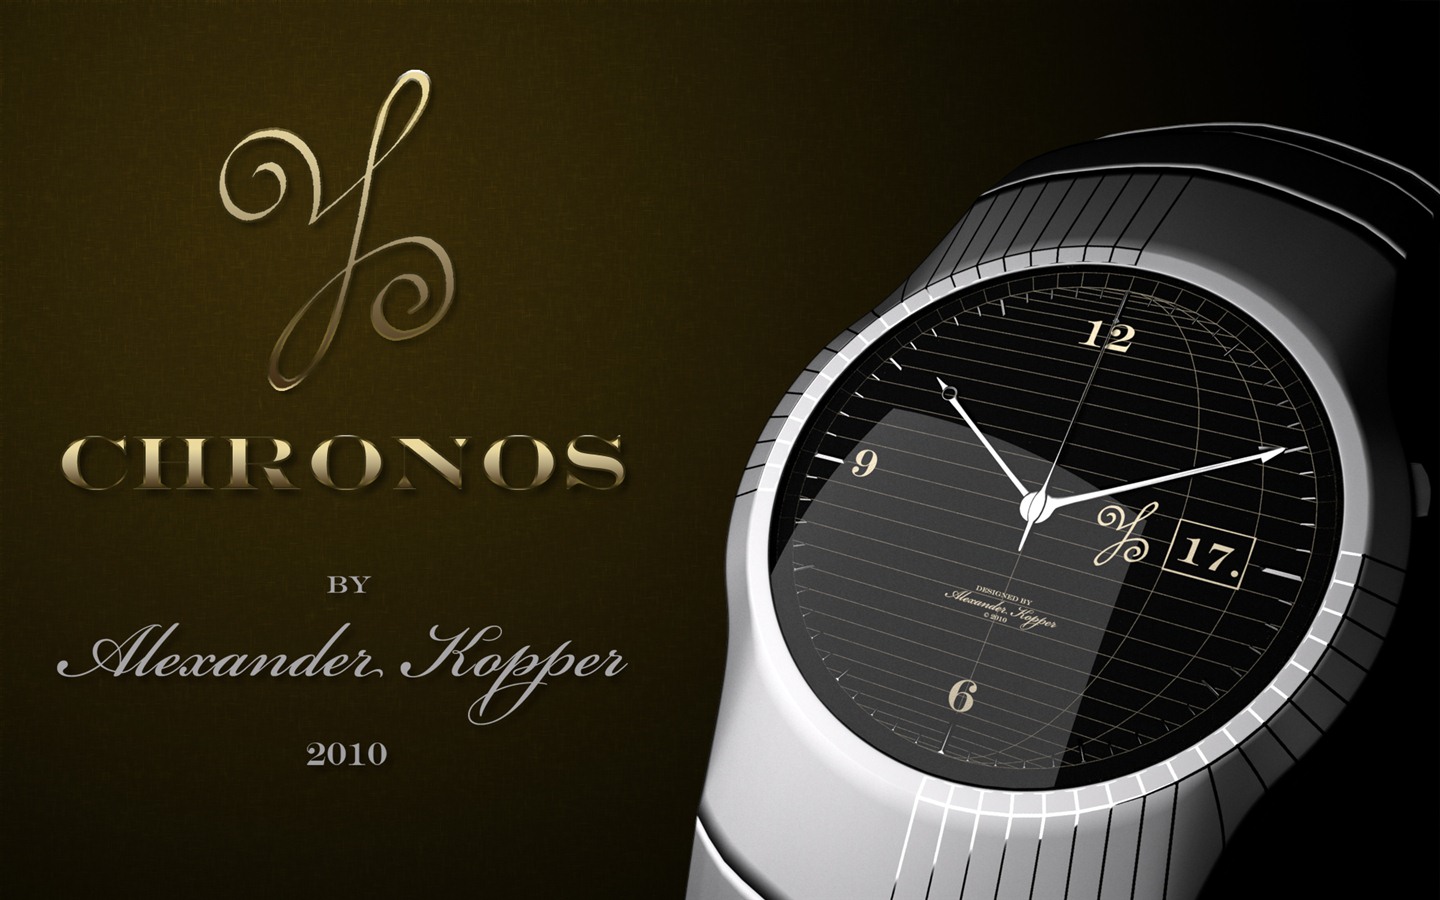 World famous watches wallpapers (1) #18 - 1440x900